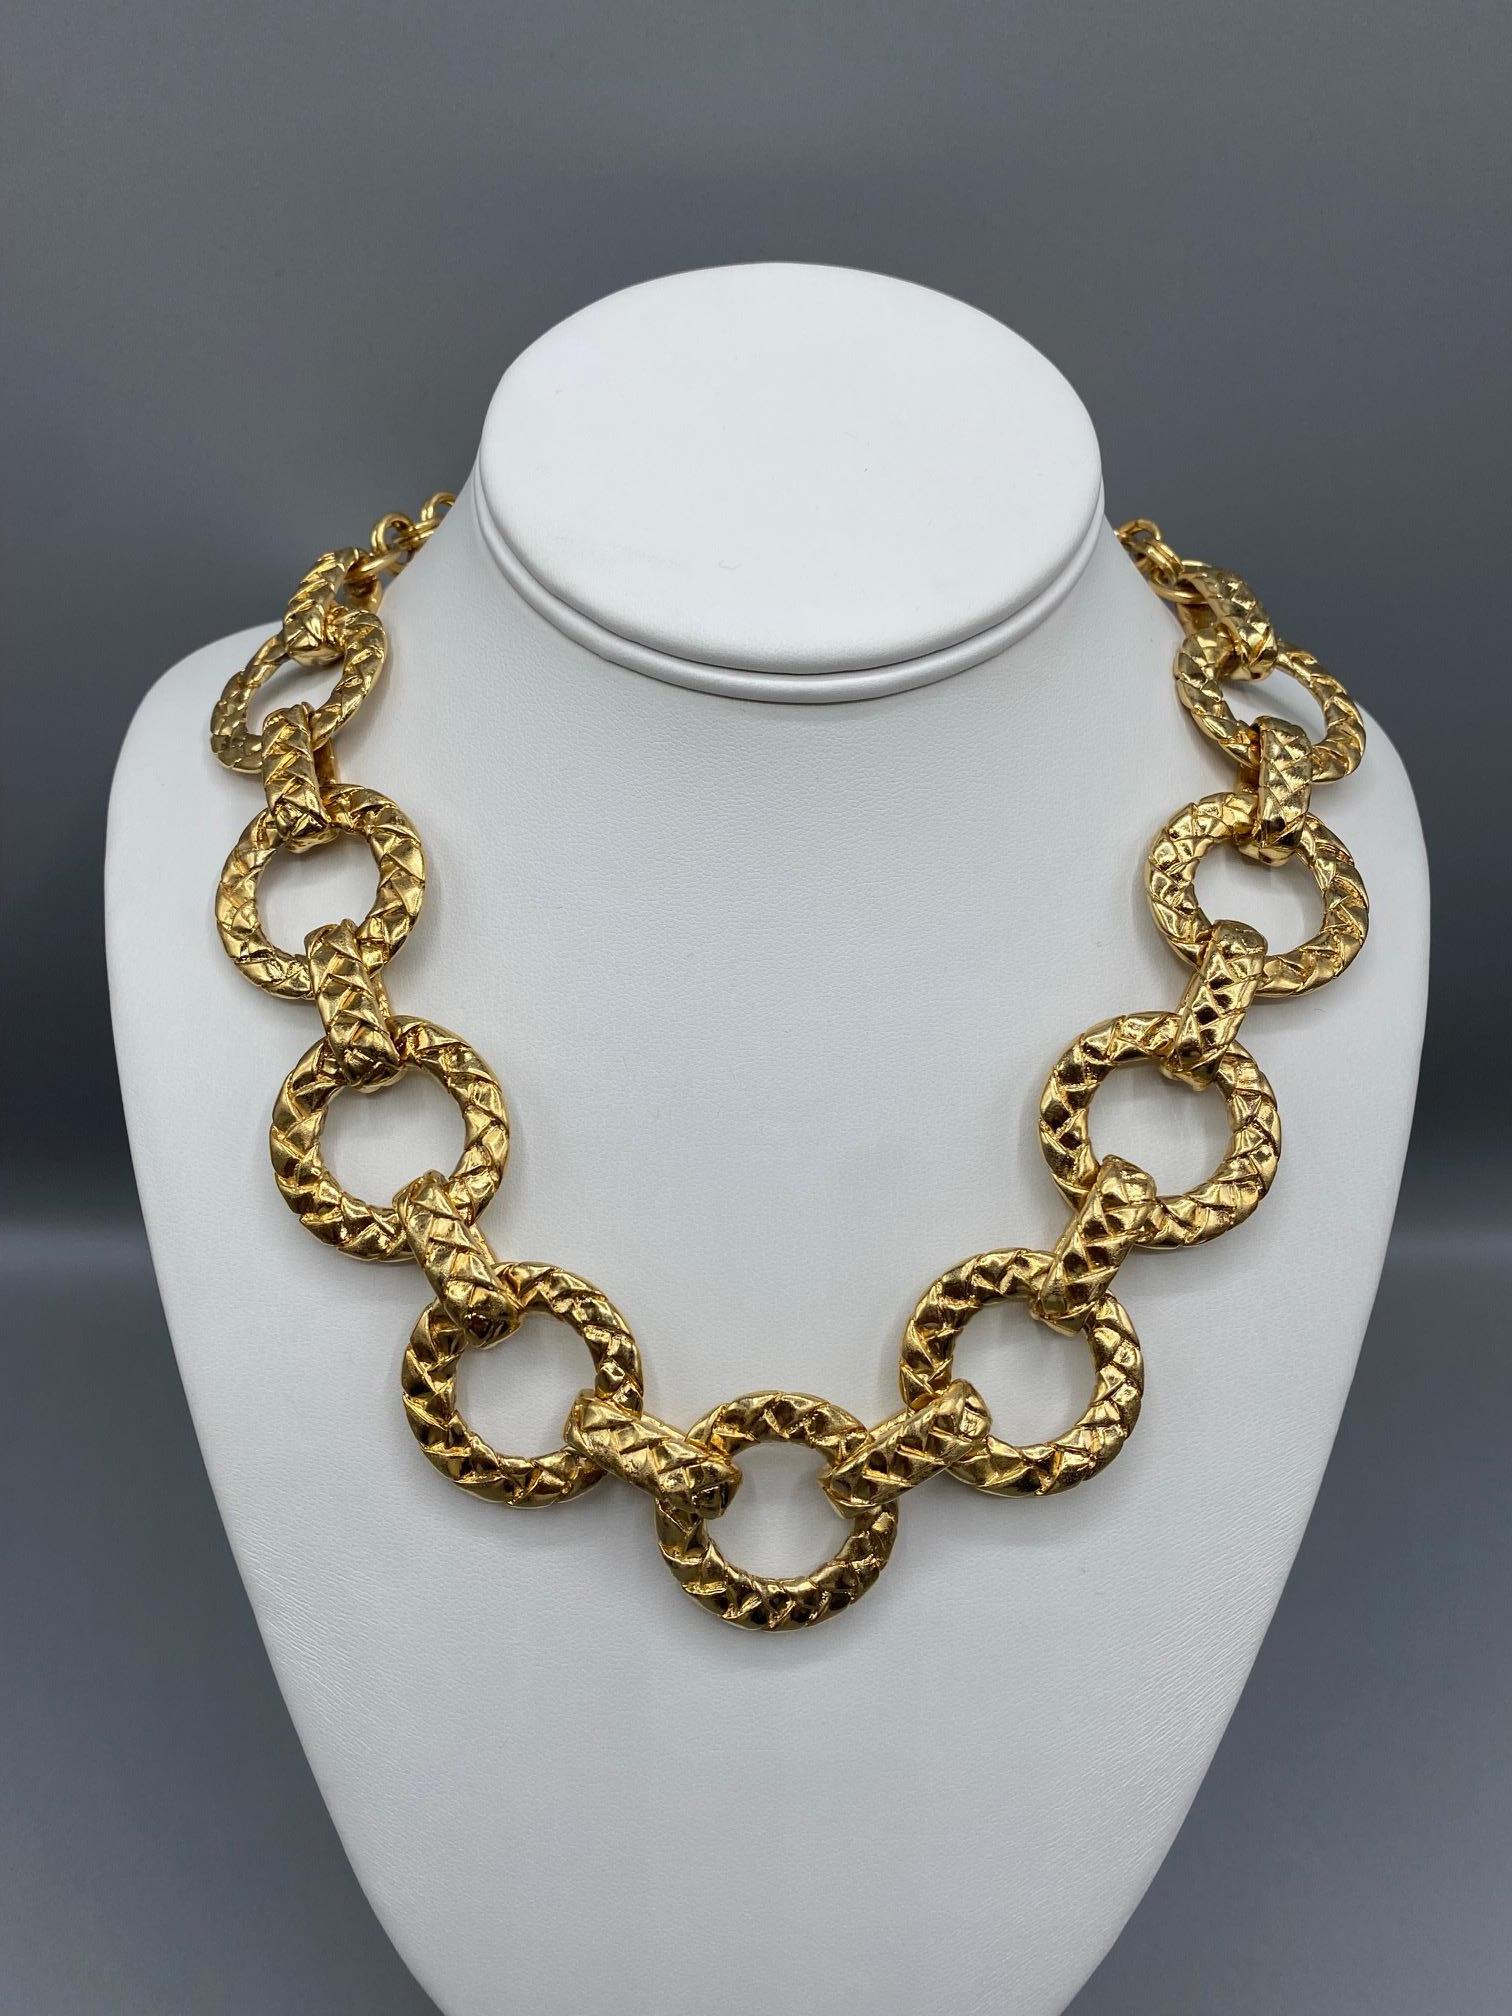 Yves Saint Laurent 1980's Round Quilt Link Chain Necklace For Sale 3